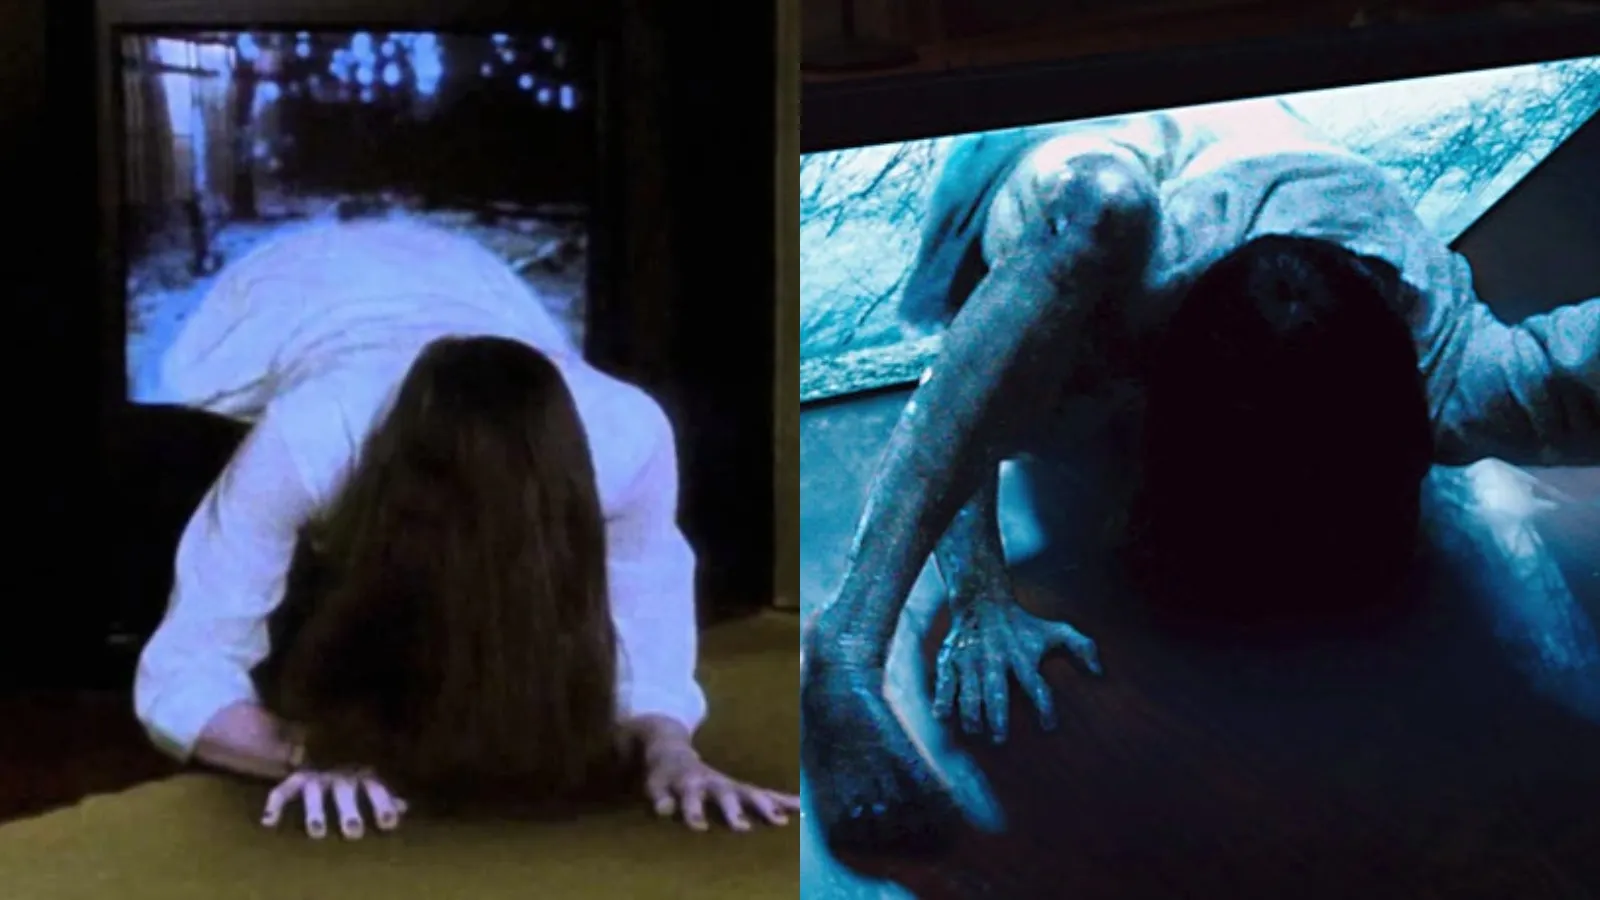 Screencaps from Ringu (1998) (left) and The Ring (2002) (right)